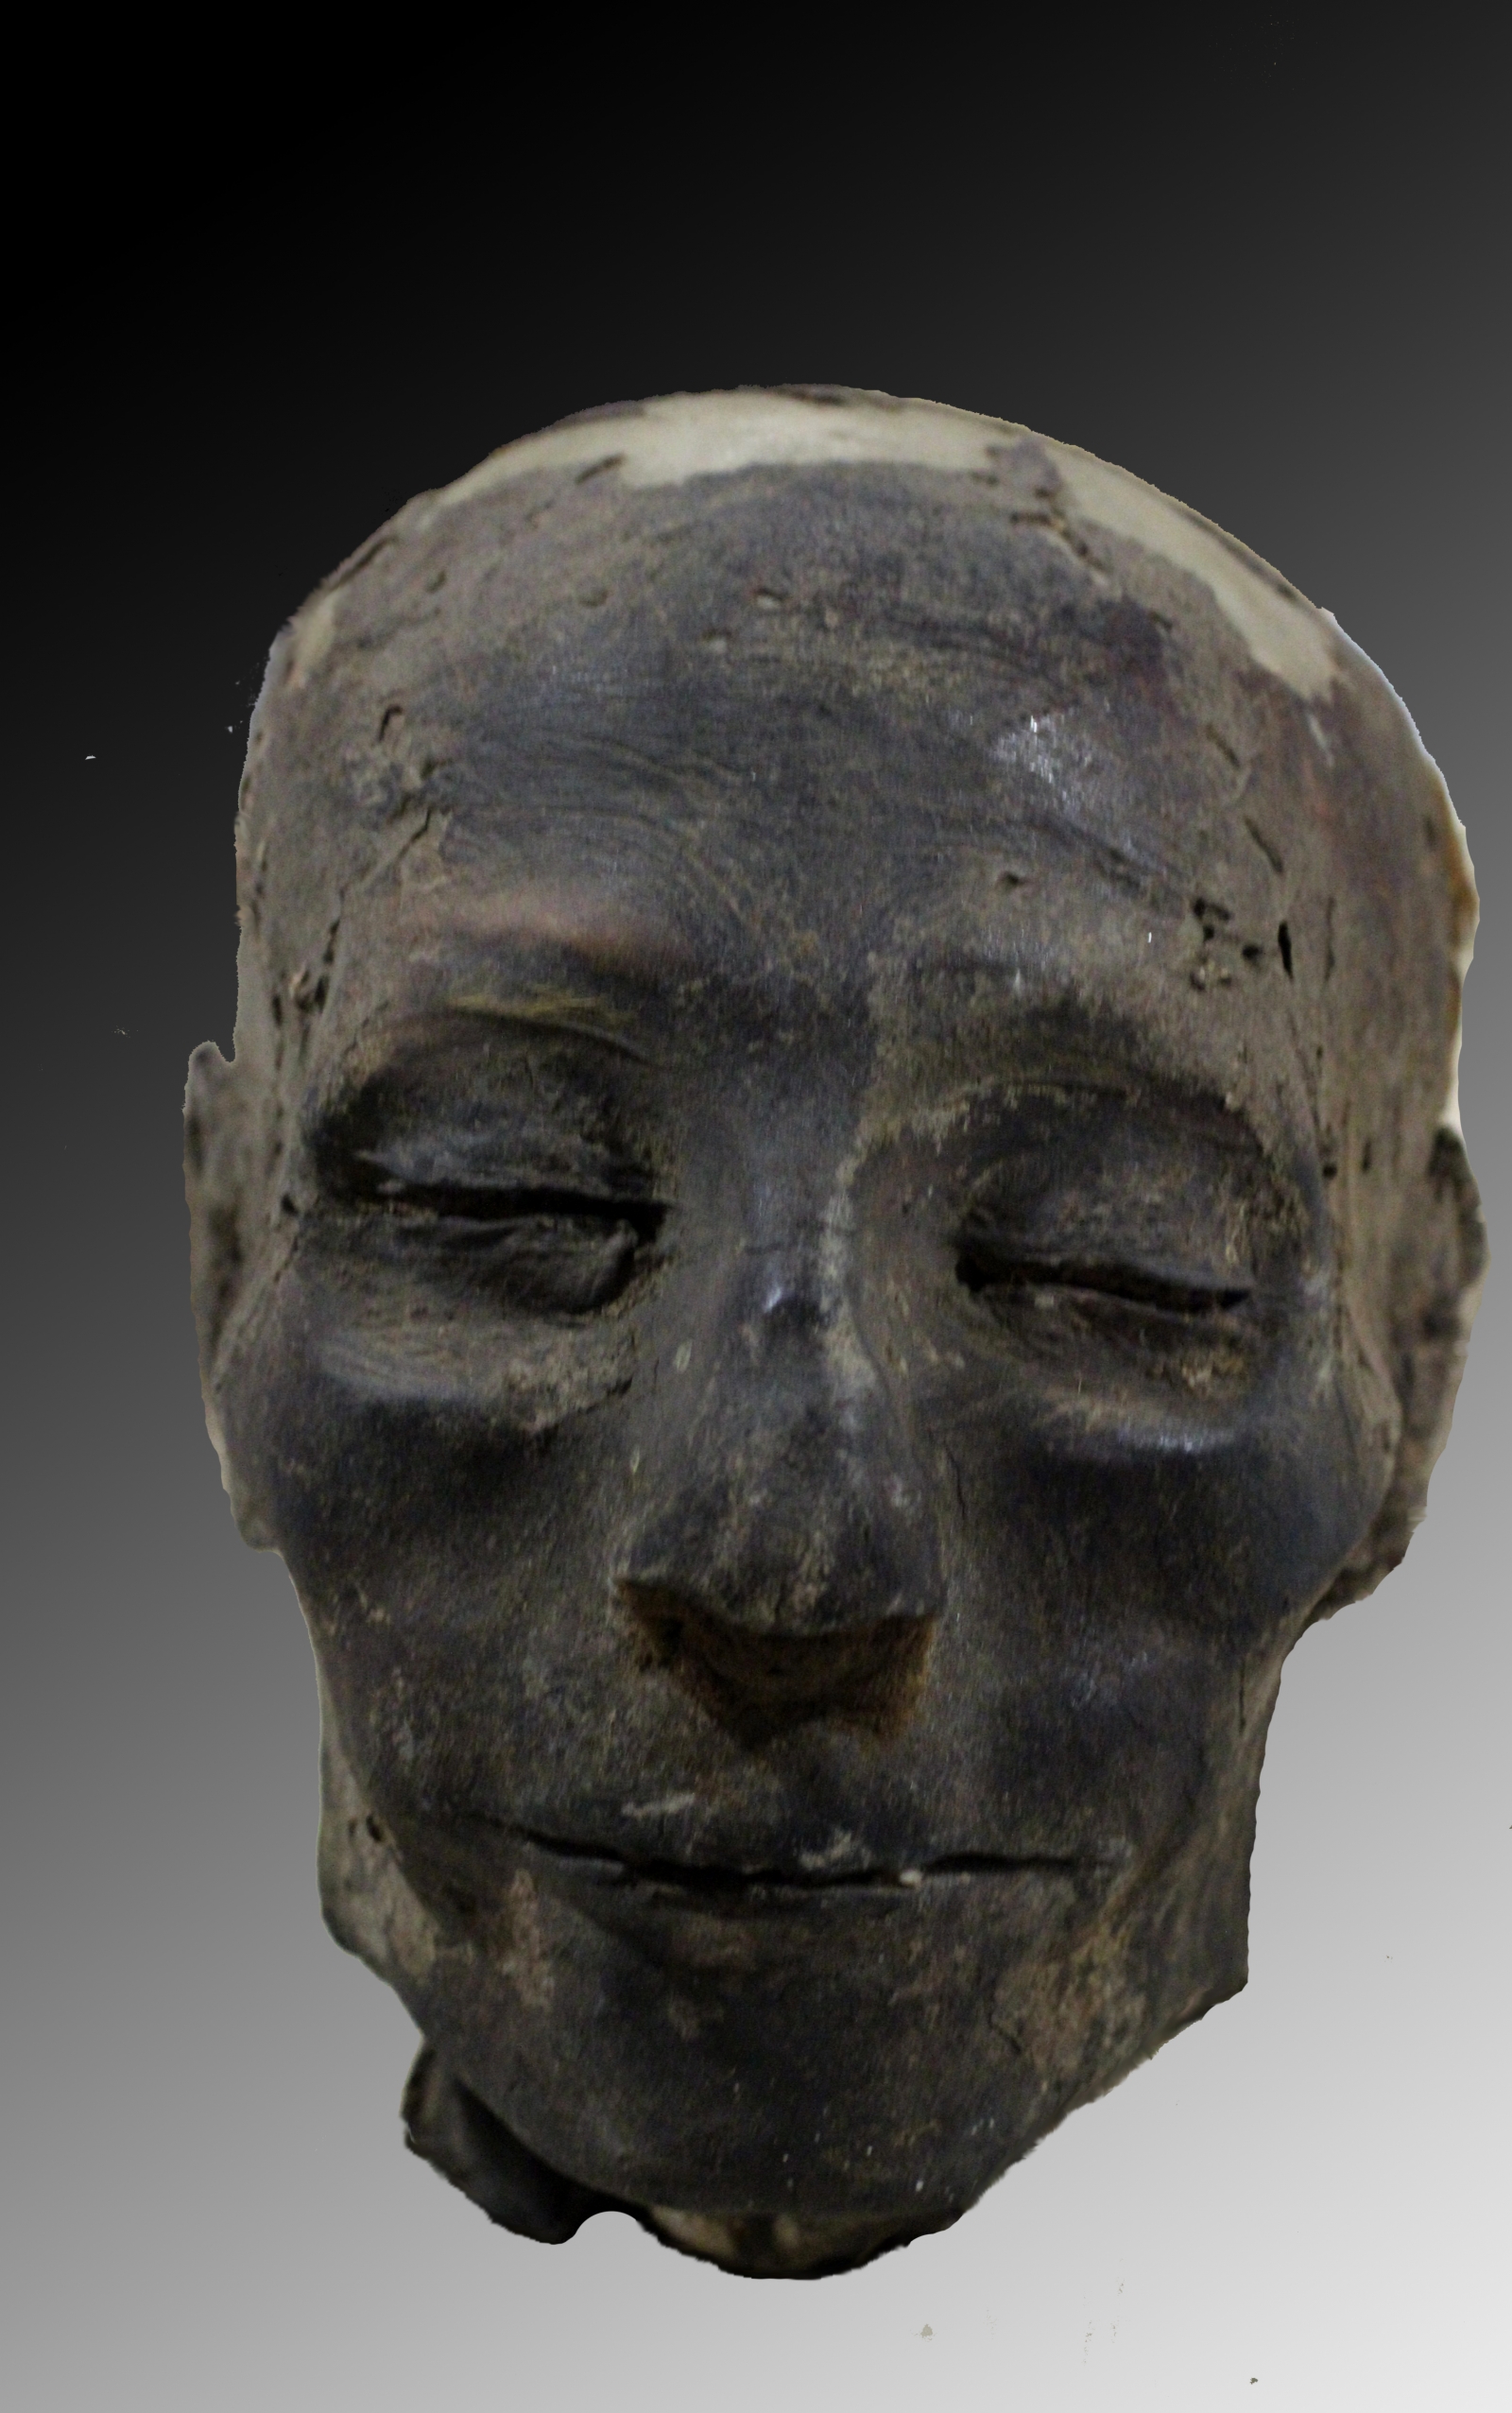 Face of ancient dignitary shows how mummies were made in Egypt 3,500